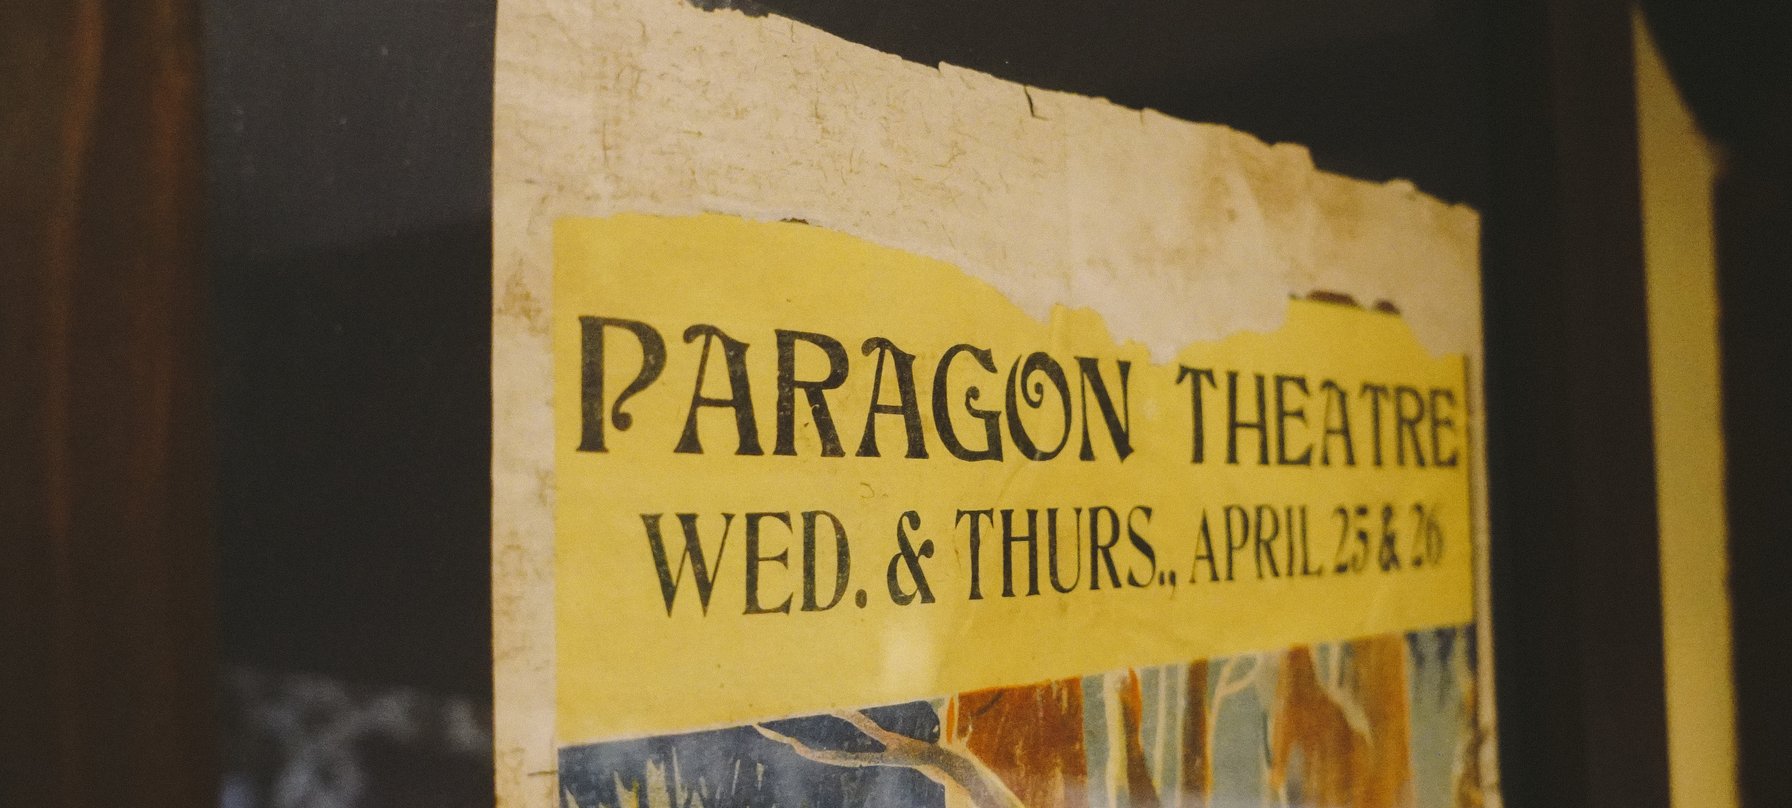 A photo of a Paragon Theatre poster on a window, credit Ollie Khedun and West Coast Council.